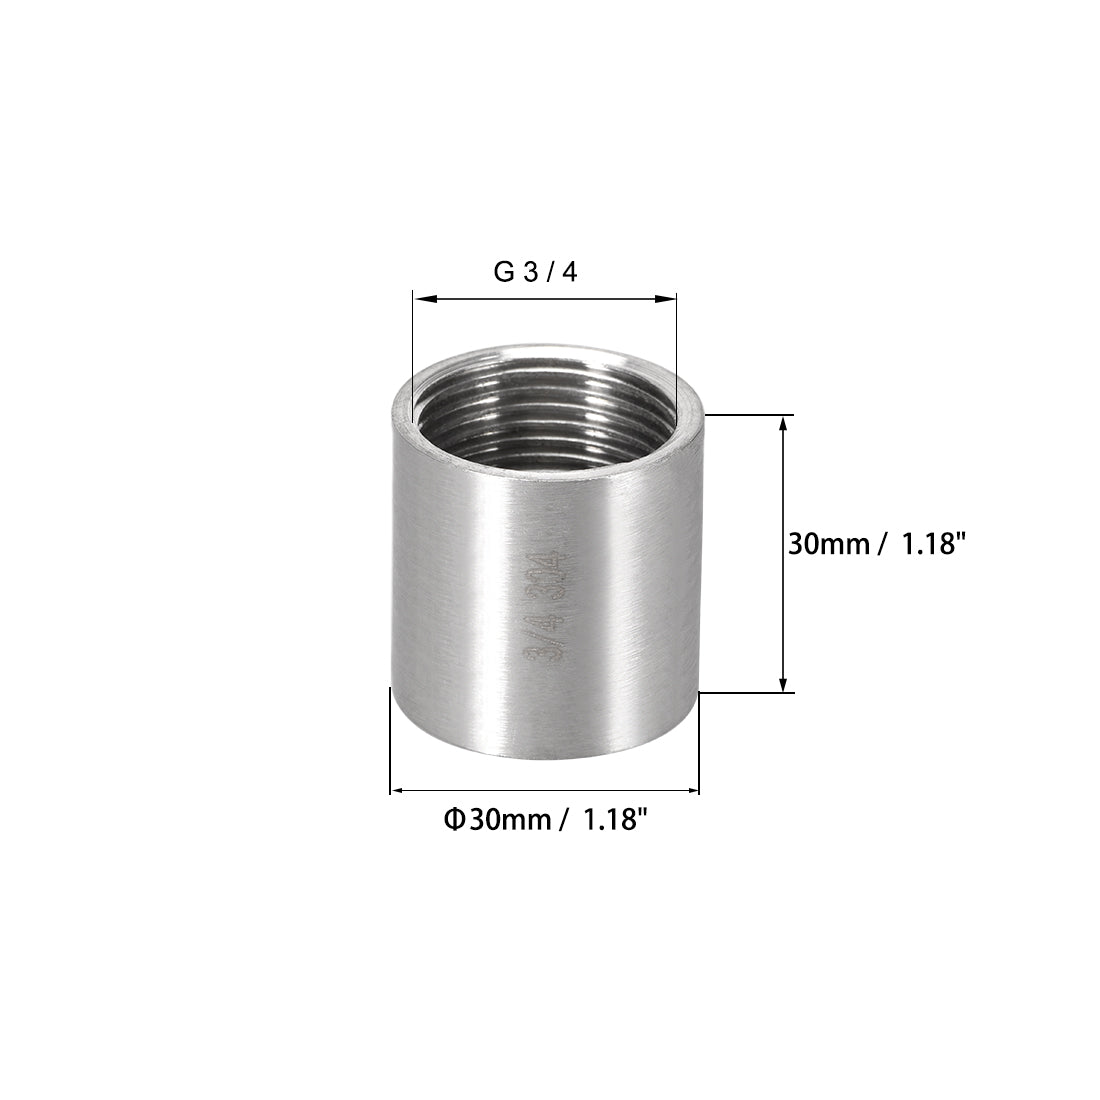 uxcell Uxcell Stainless Steel 304 Cast Pipe Fittings Coupling 3/4 x 3/4 G Female 3pcs